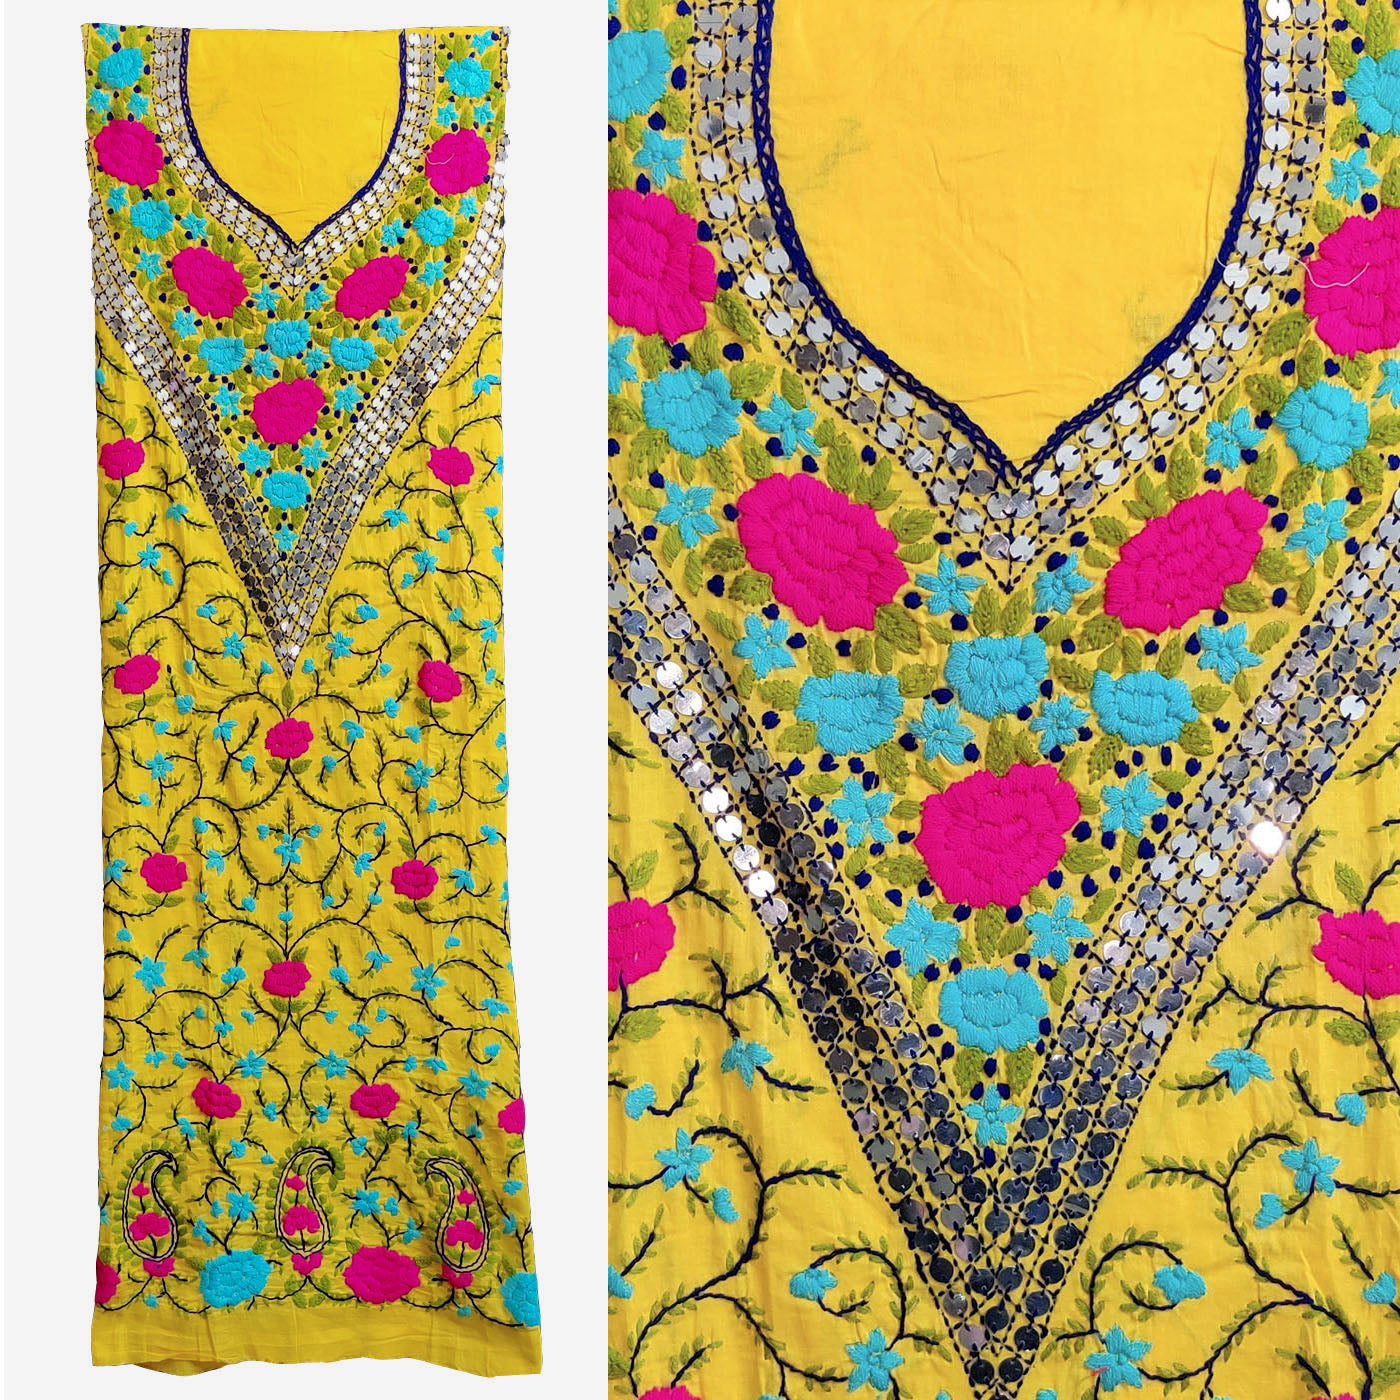 YELLOW COTTON CUSTOM STITCHED HAND EMBROIDERED KURTI KURTA OR SALWAR KAMEEZ UP TO READY SIZE 54 (stitching included) LADIES DEN